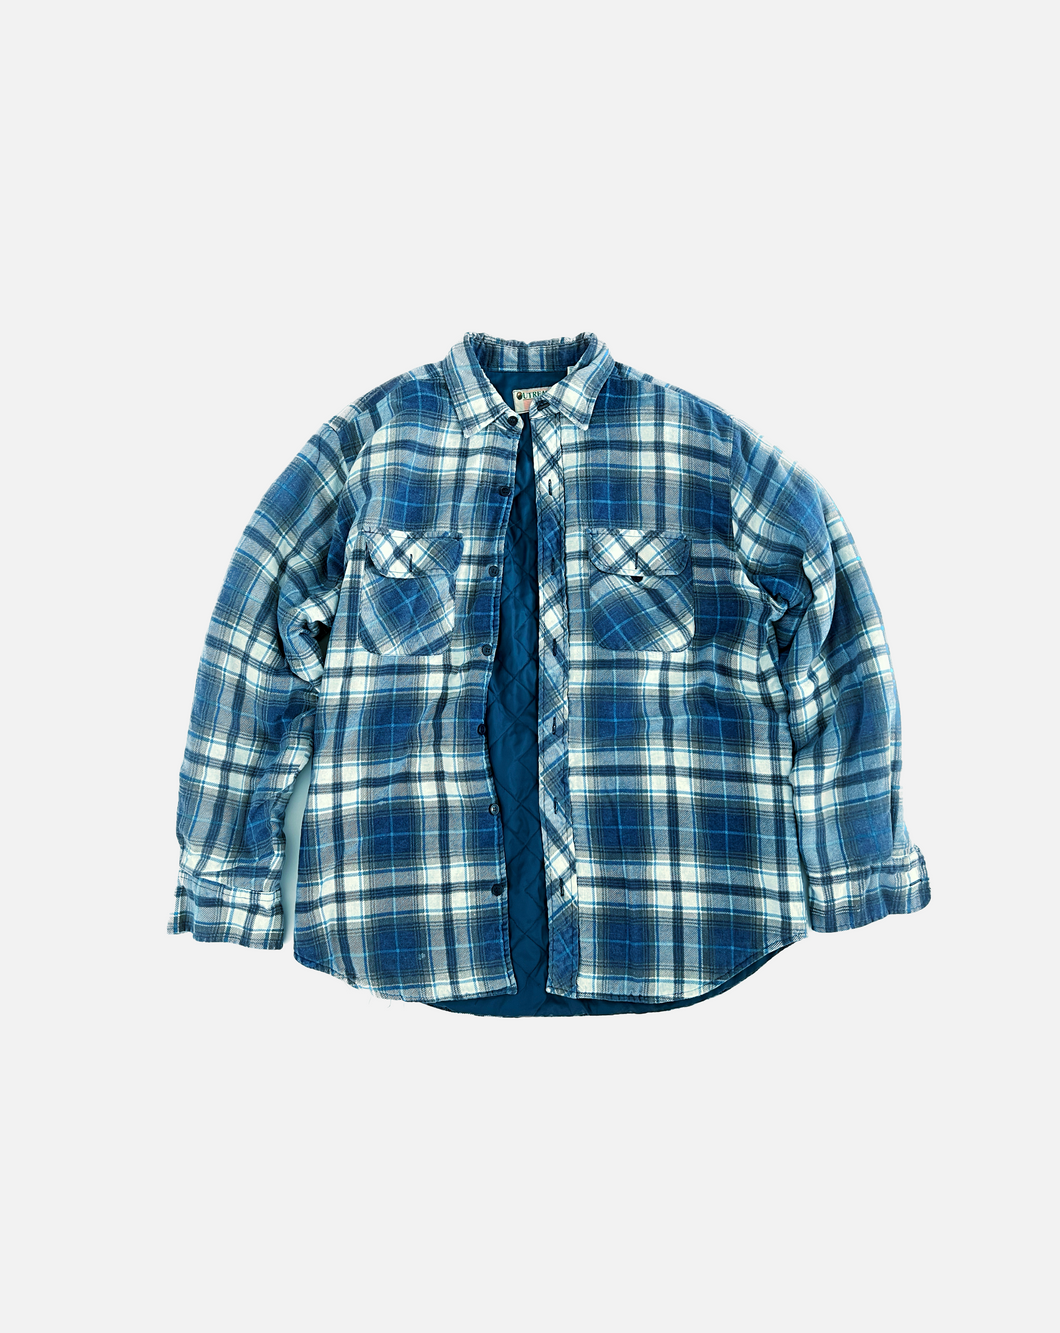 Distressed Quilted Flannel Shirt